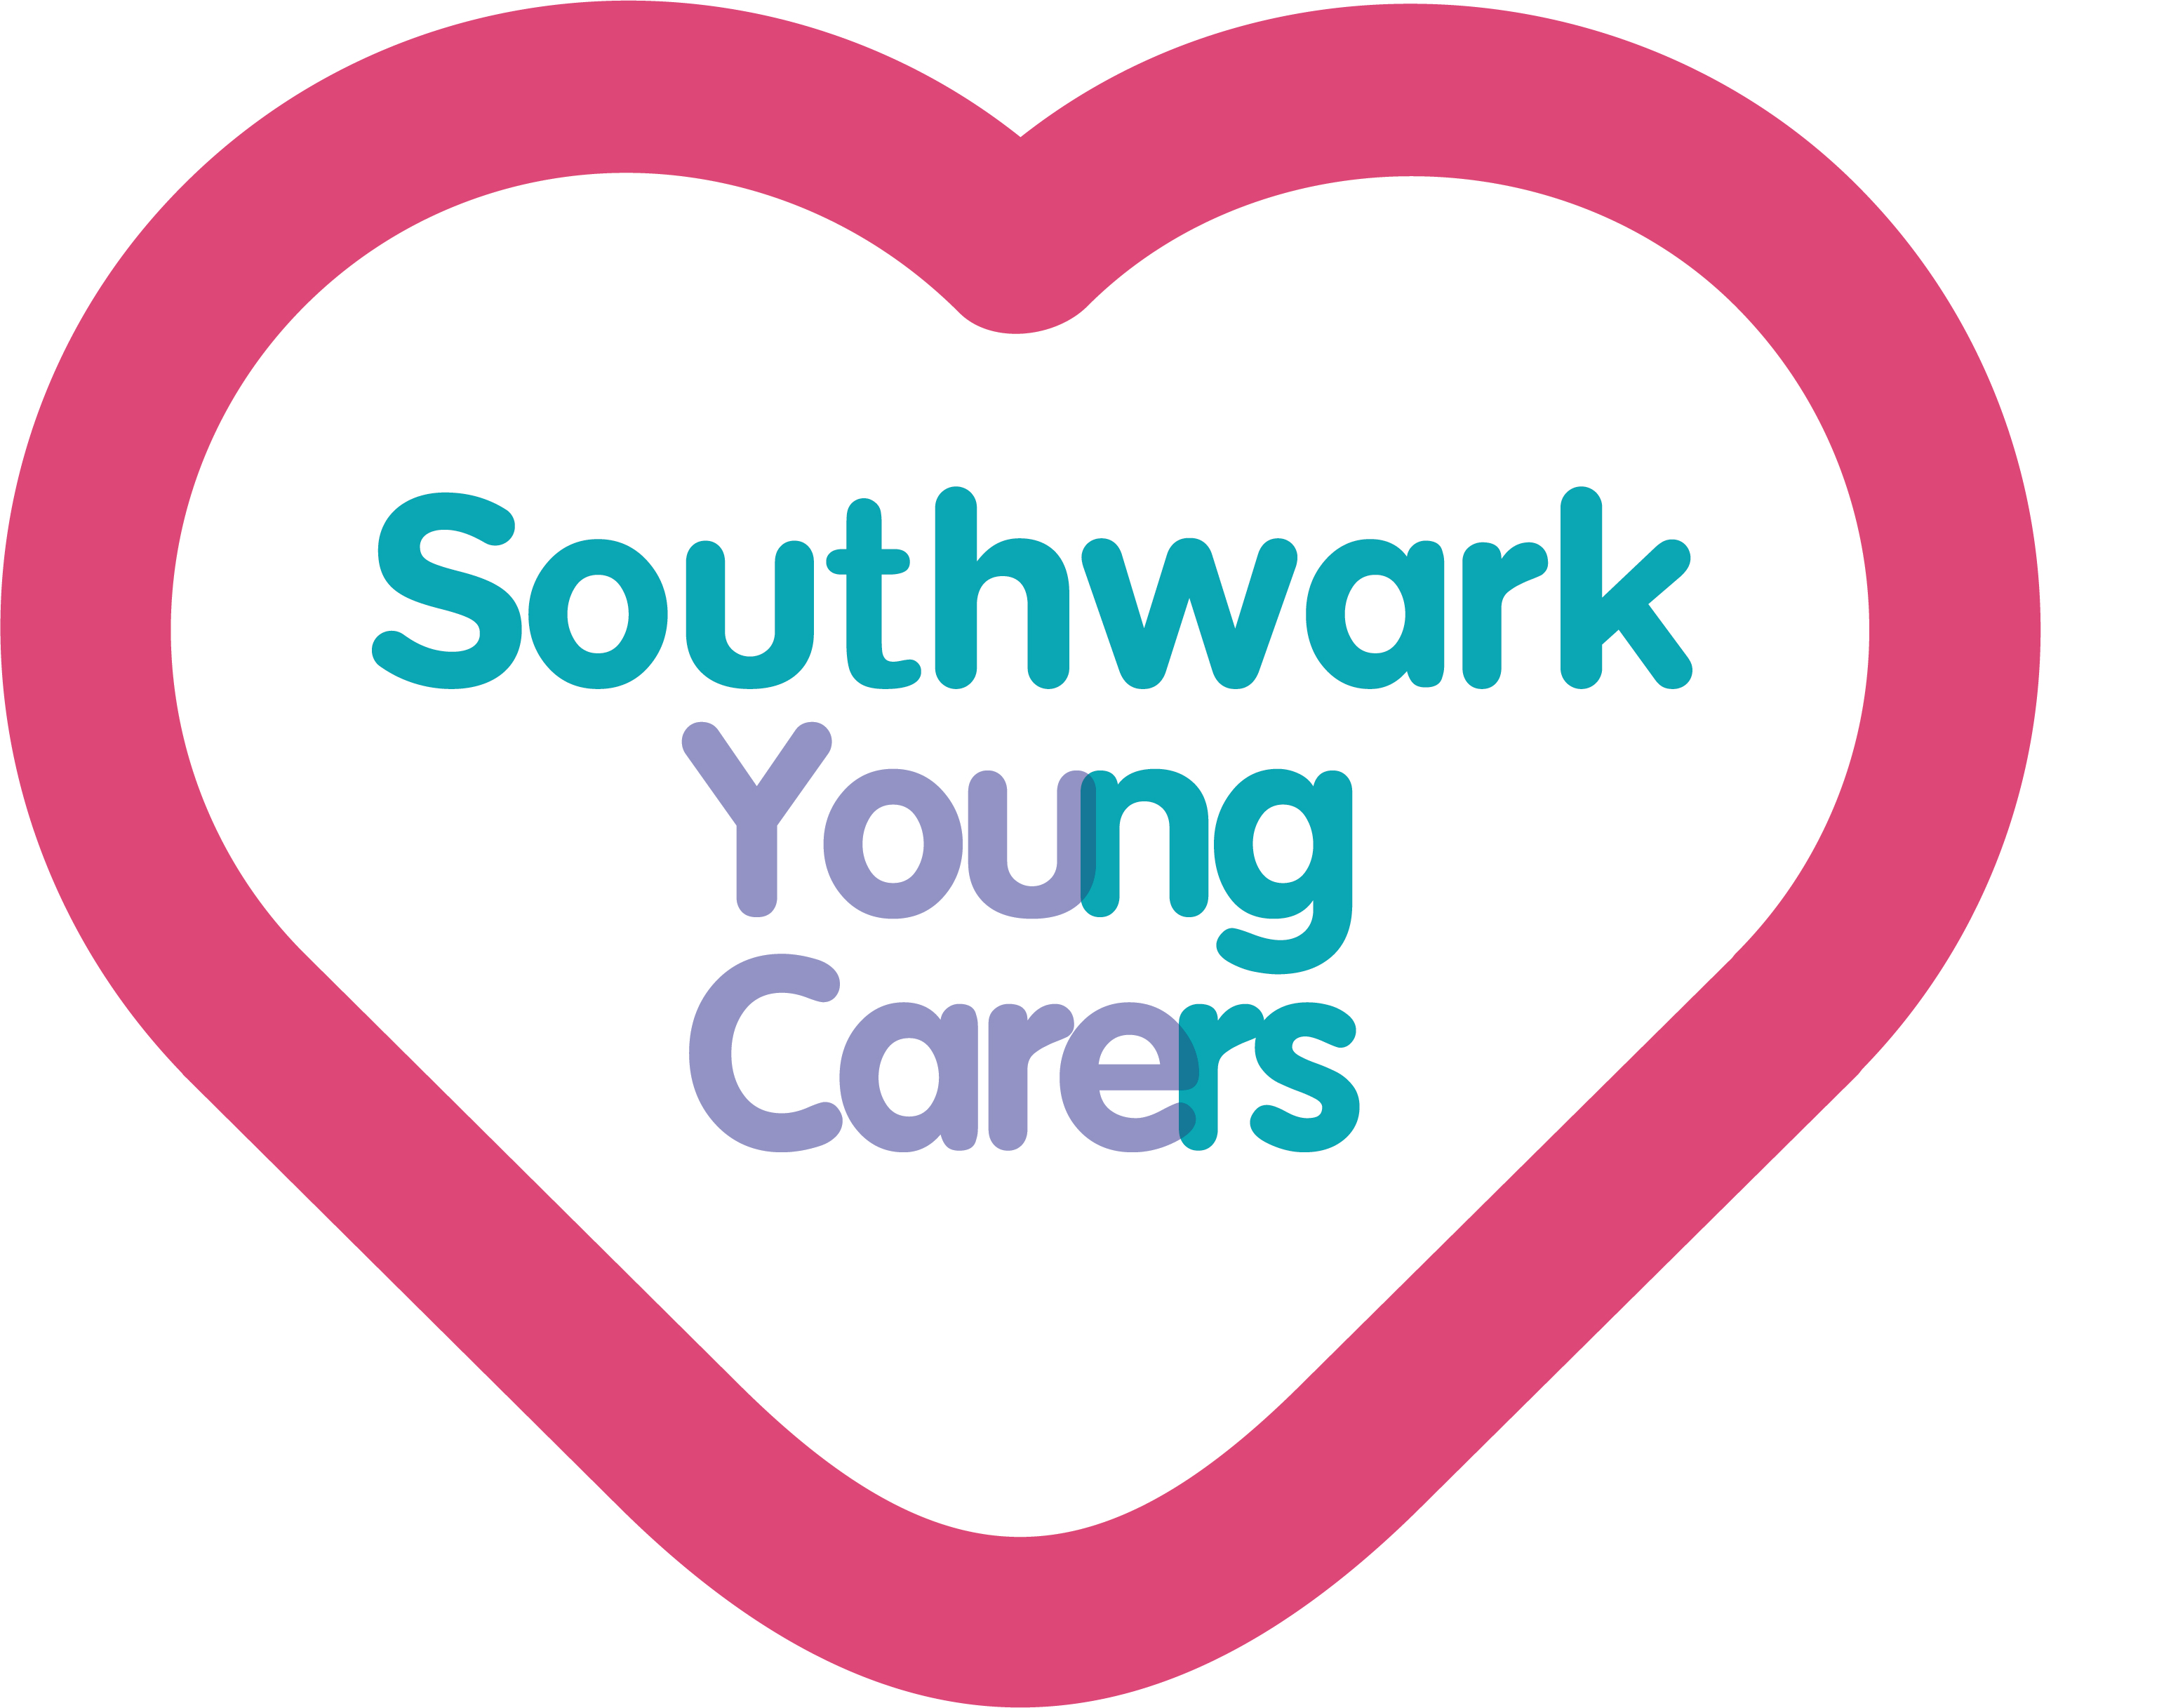 Southwark Young Carers aged 8-24